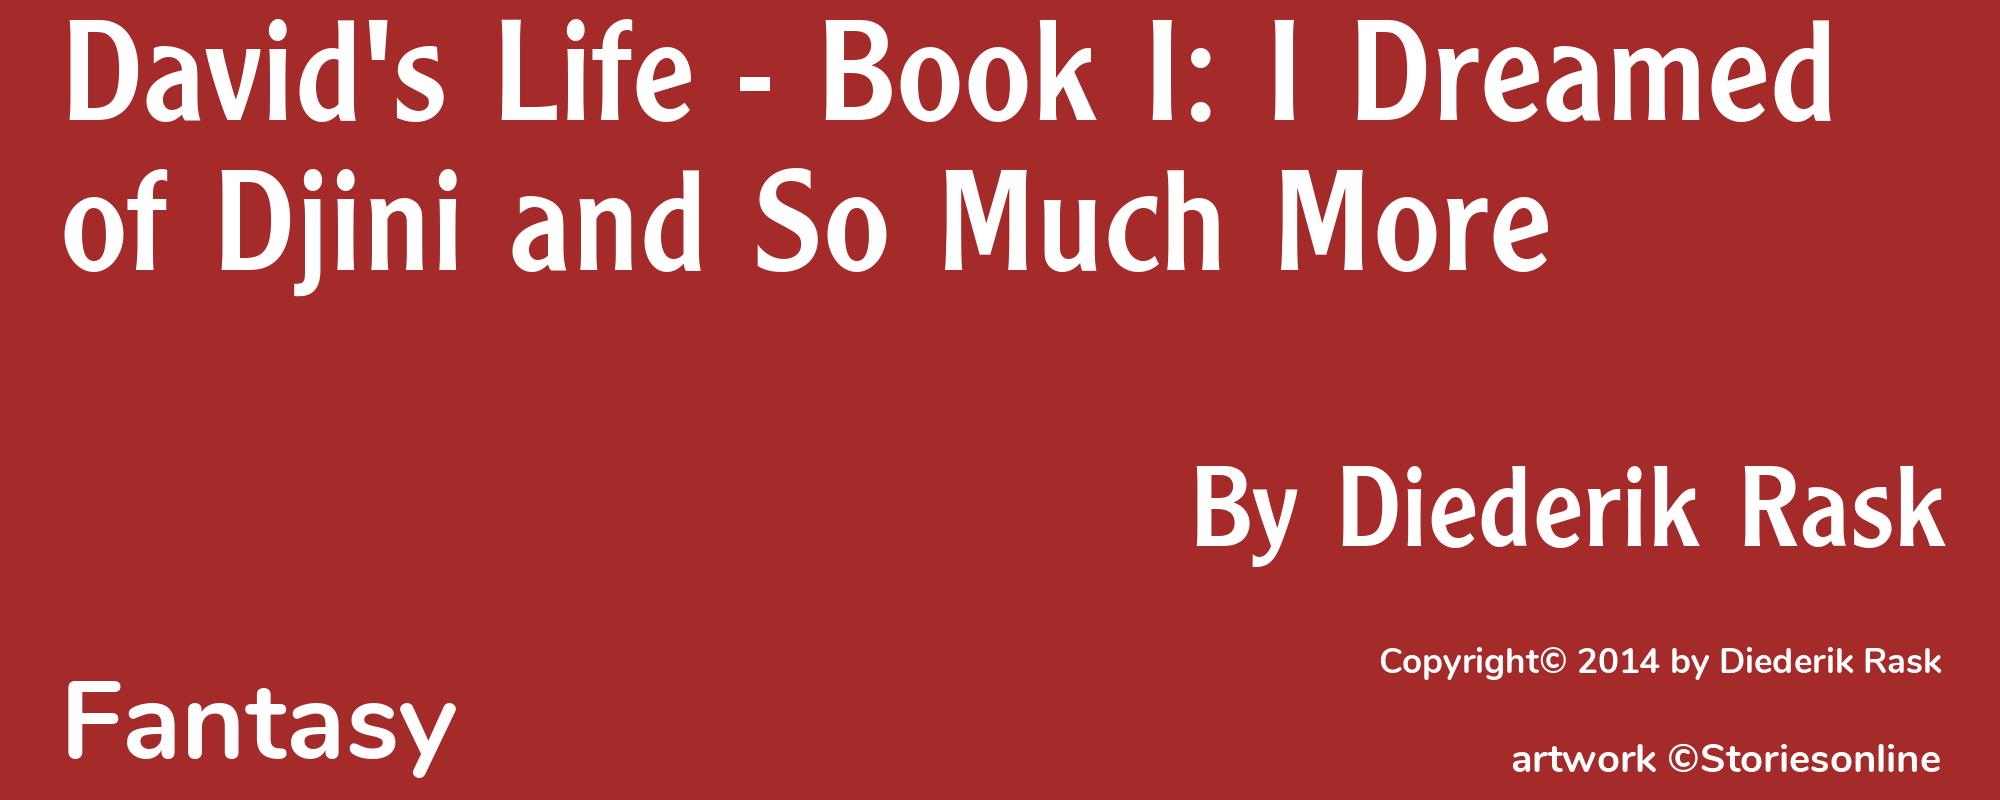 David's Life - Book I: I Dreamed of Djini and So Much More - Cover